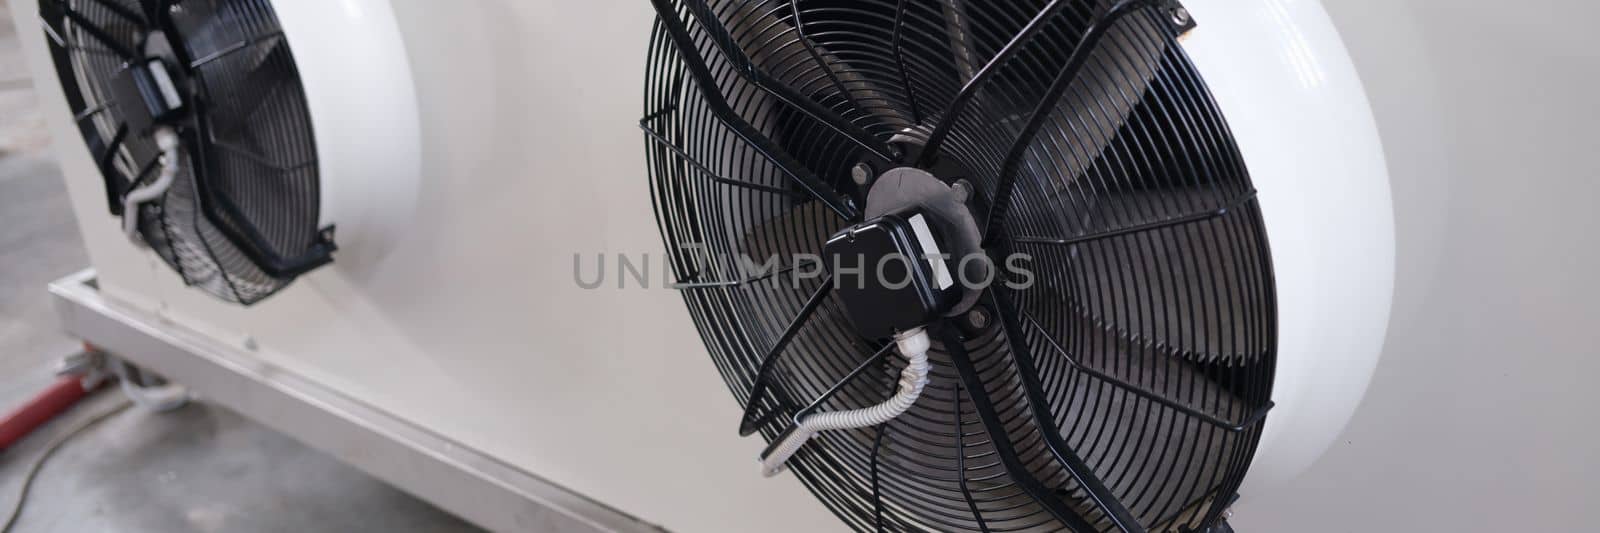 Large industrial air conditioner with high cooling capacity. Air conditioning fan concept